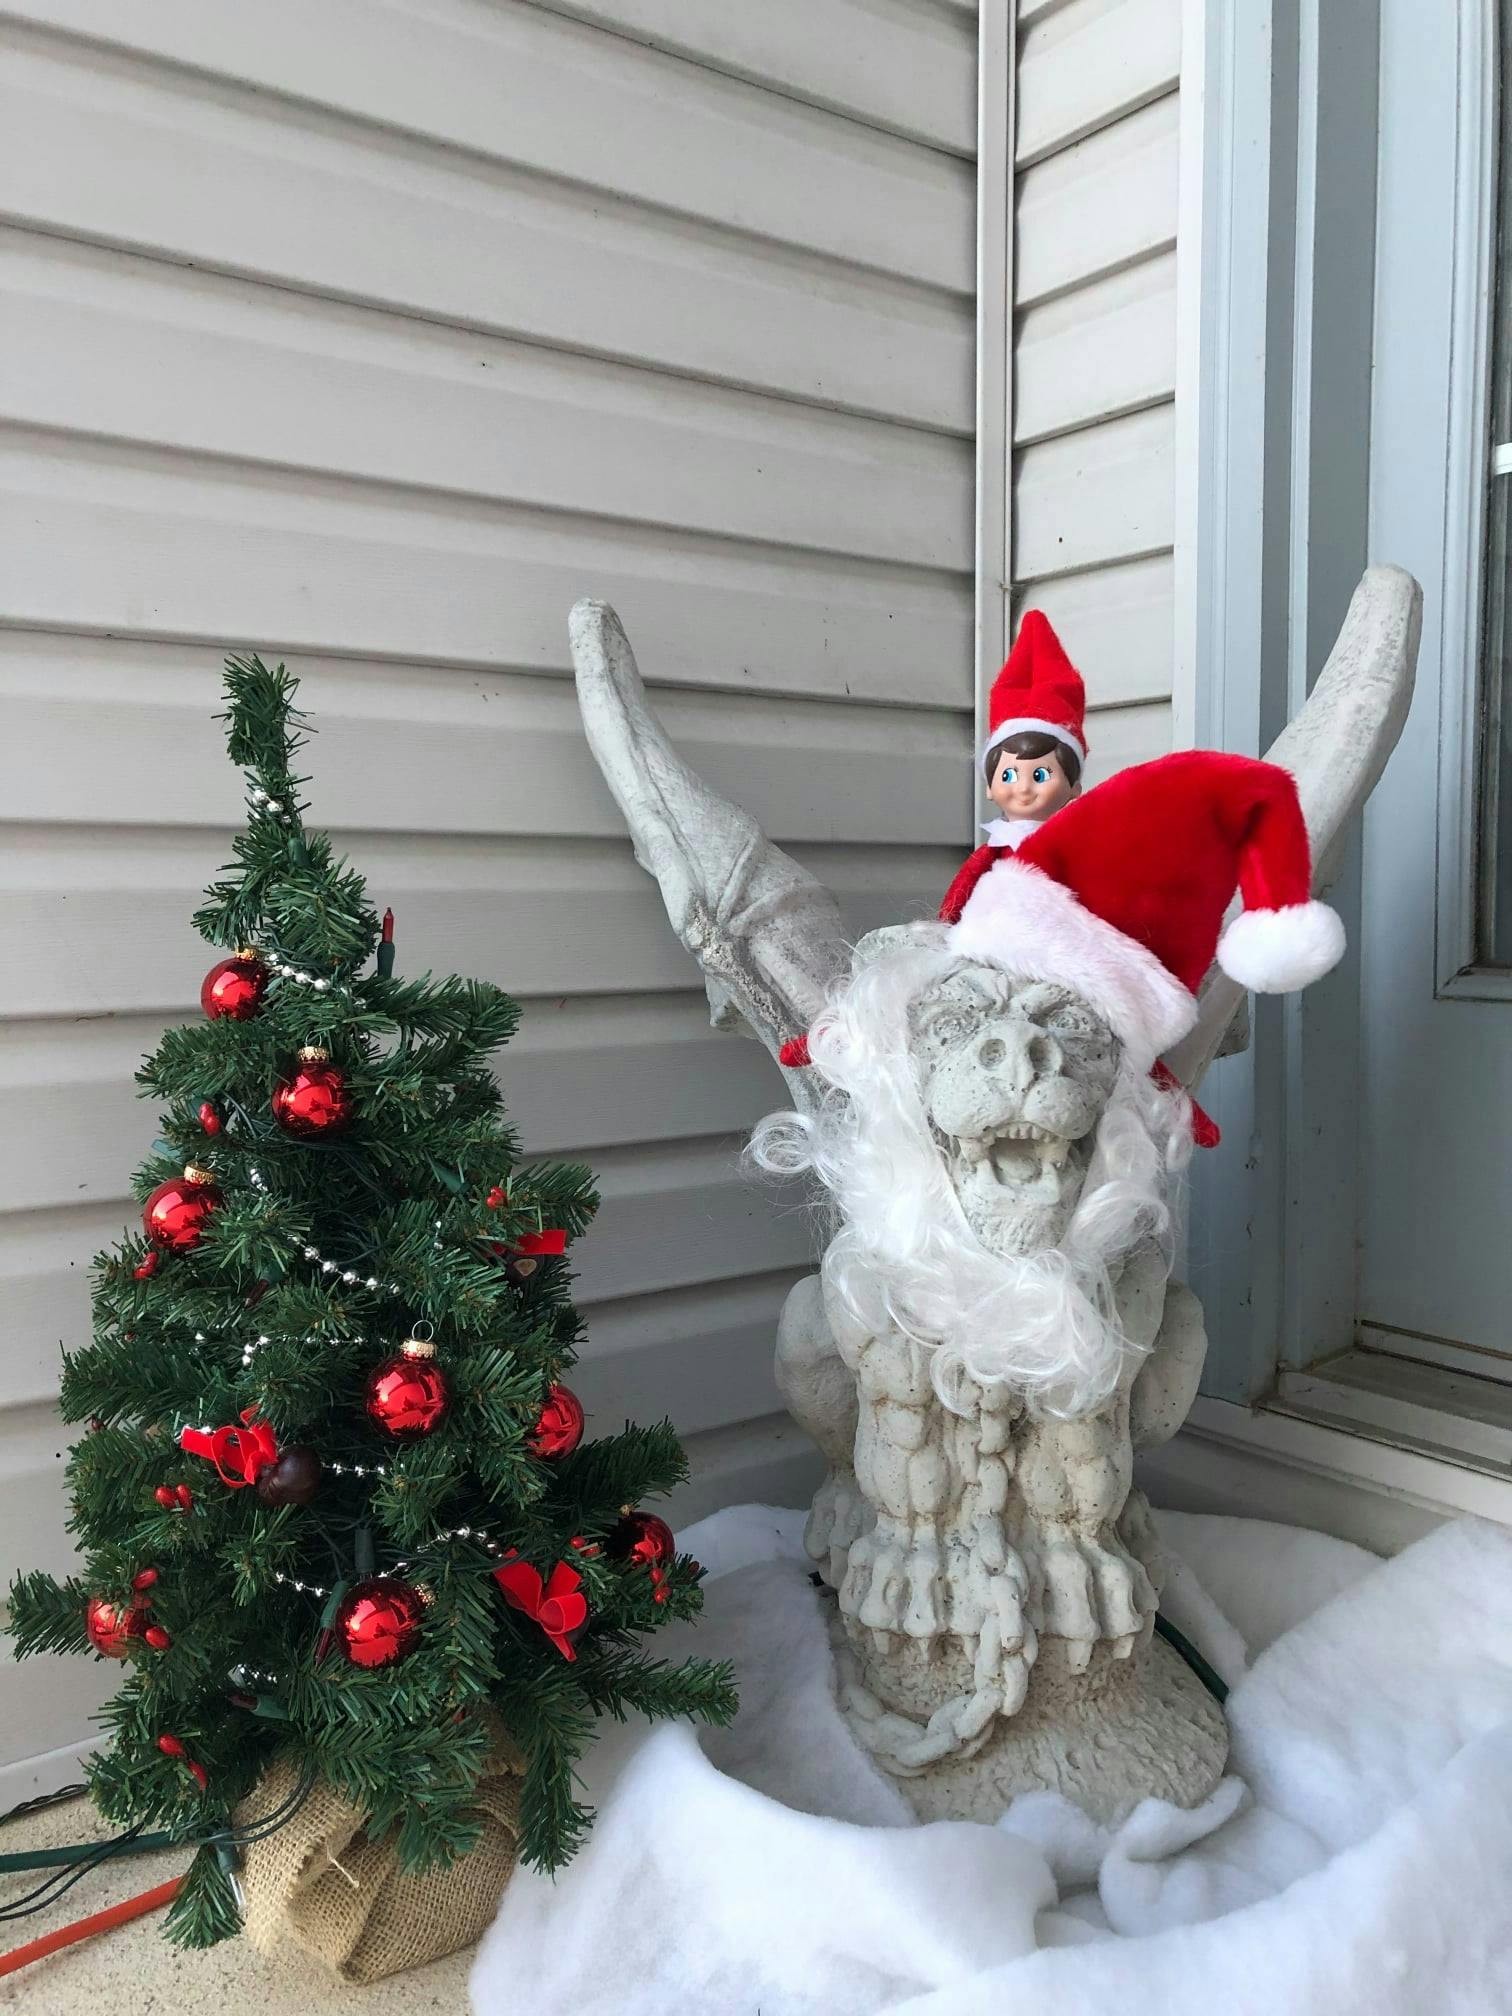 The gargoyle wearing a Santa hat and beard next to a small Christmas tree with red baubles. An elf on the shelf is sitting on the gargoyle's shoulder